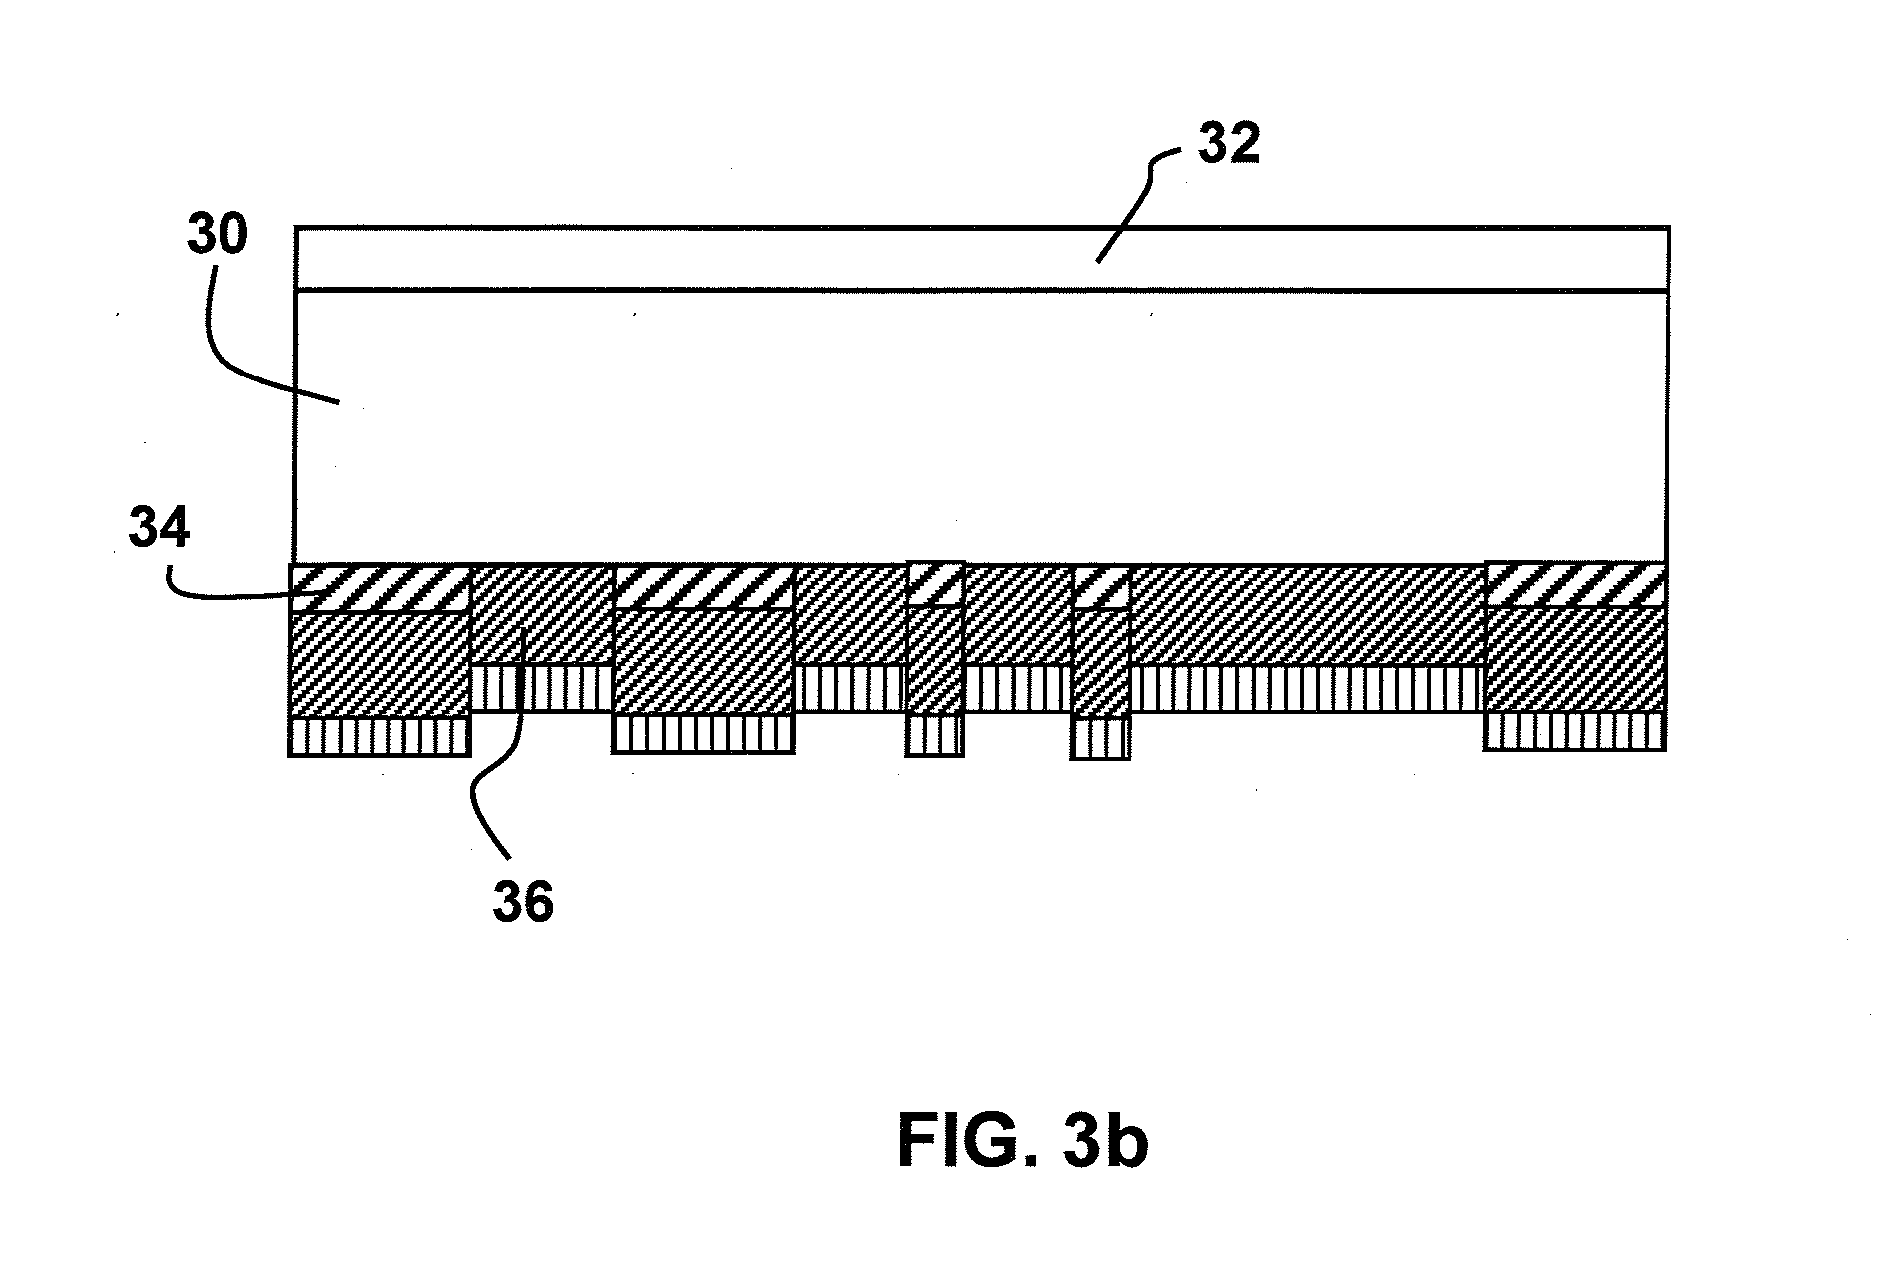 Vacuum Roll Coated Security Thin Film Interference Products With Overt And/Or Covert Patterned Layers